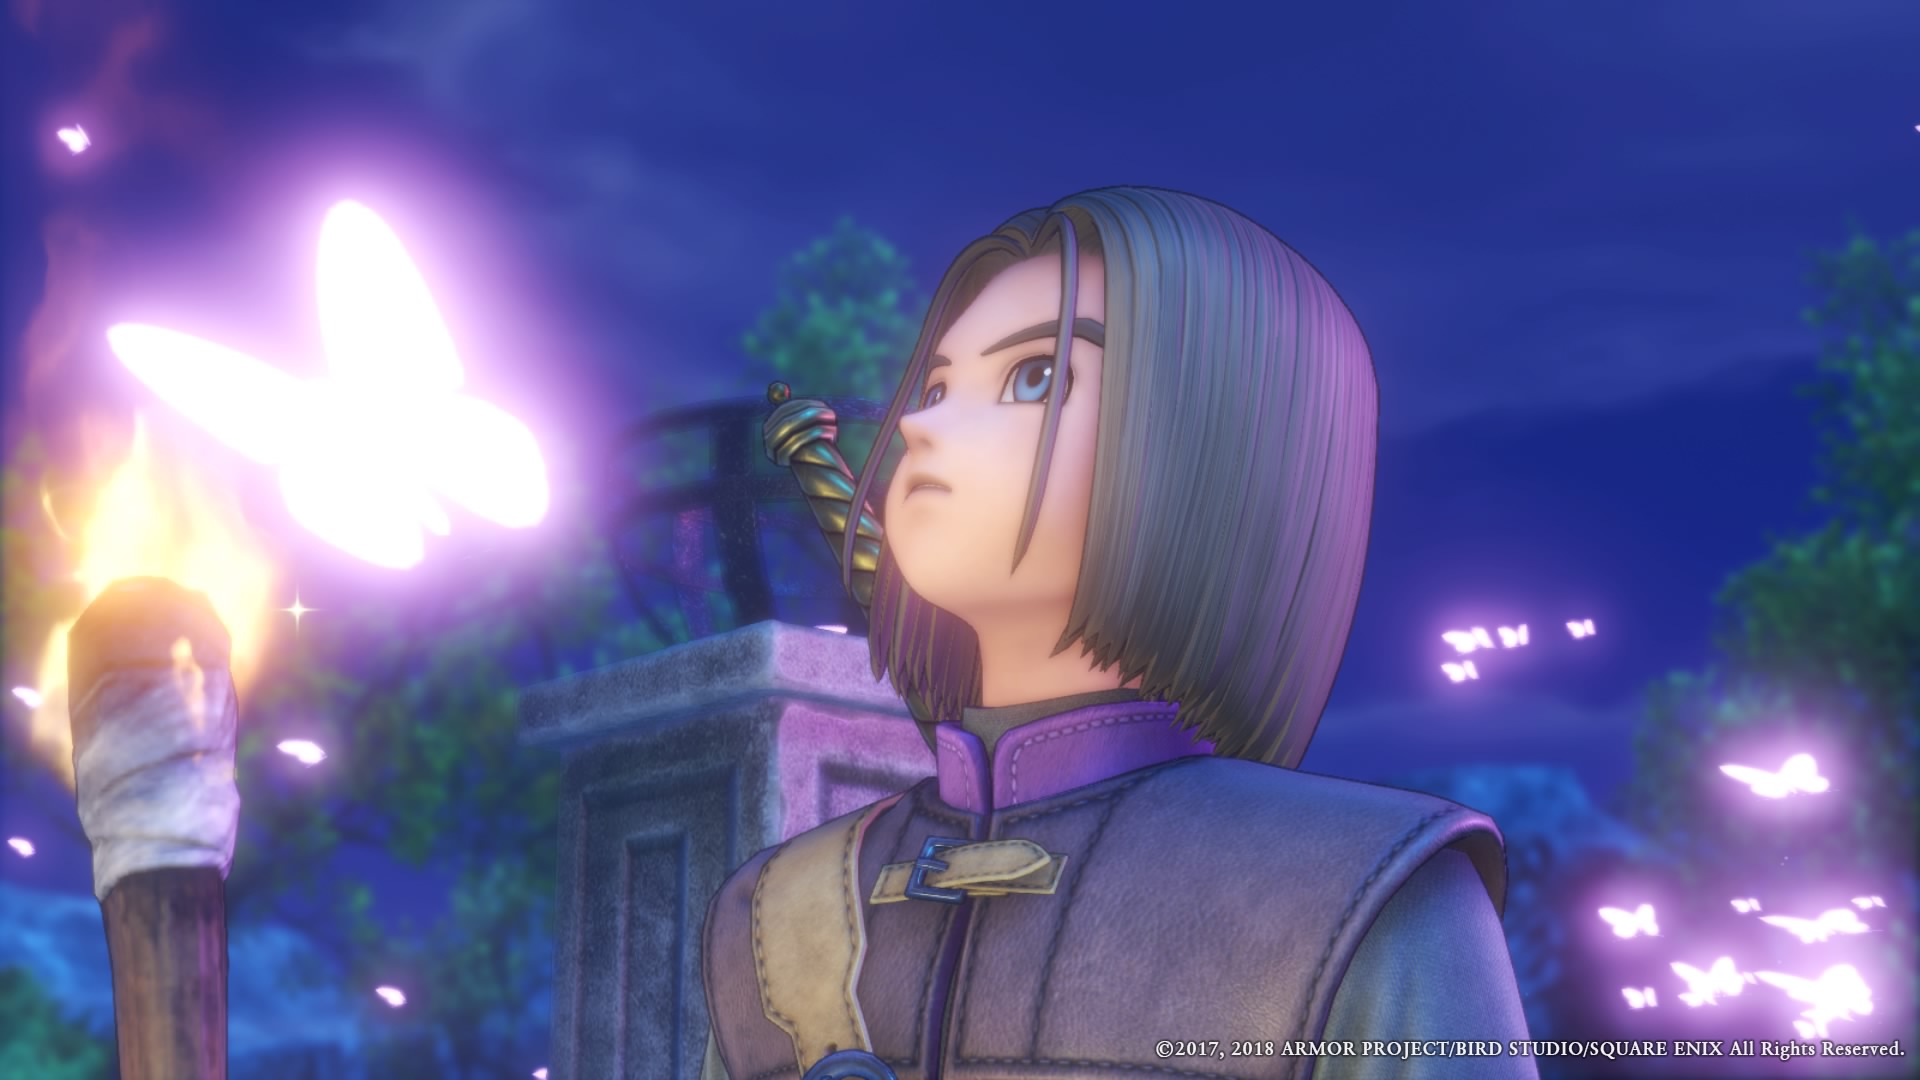 Dragon Quest XI: Echoes Of An Elusive Age Review